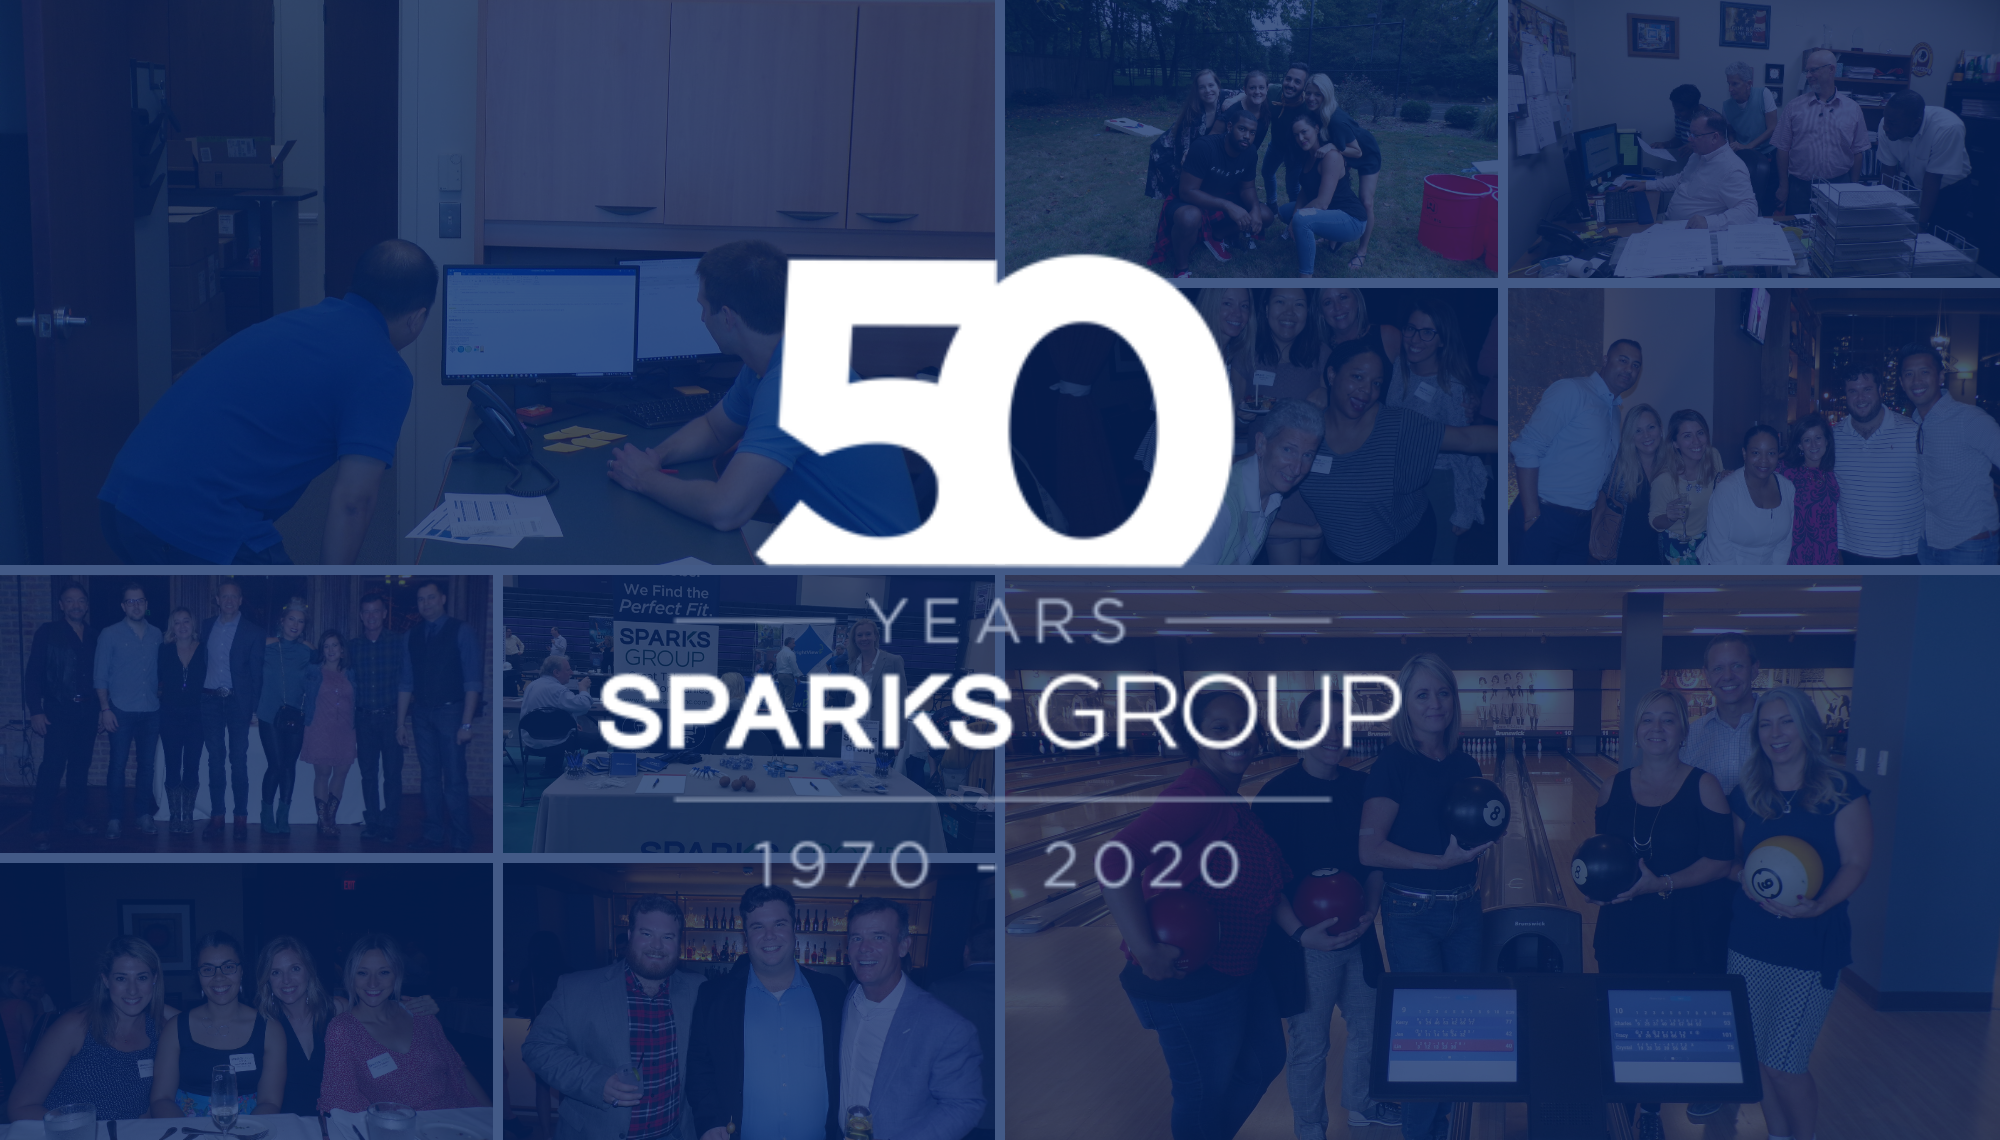 Sparks Group - Celebrating 50 Years 